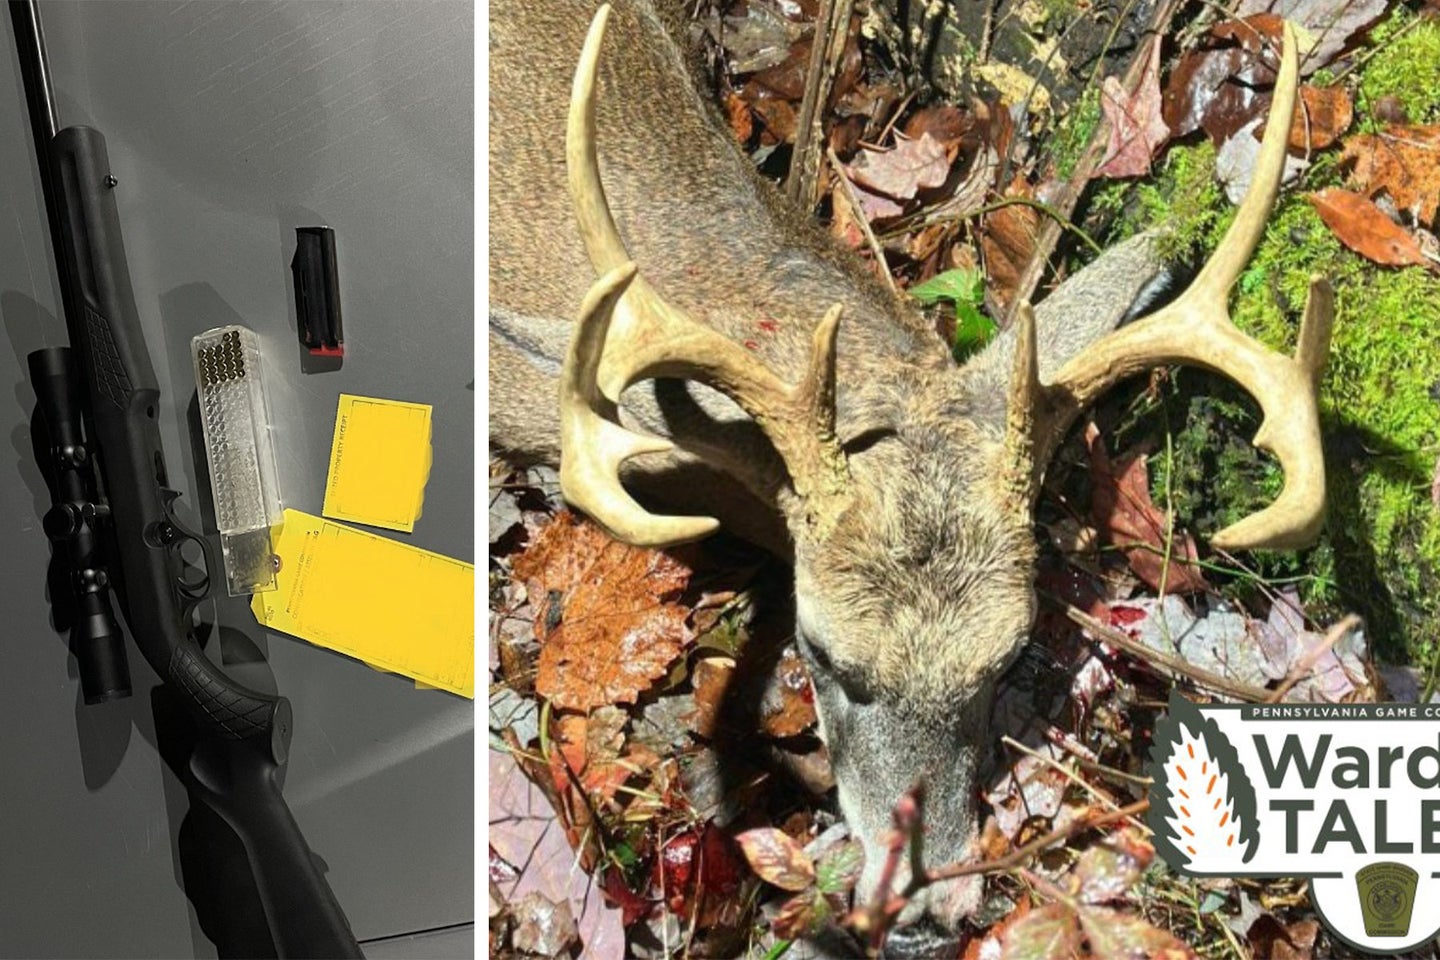 A poached buck next to a rifle seized by game warden in Pennsylvania.